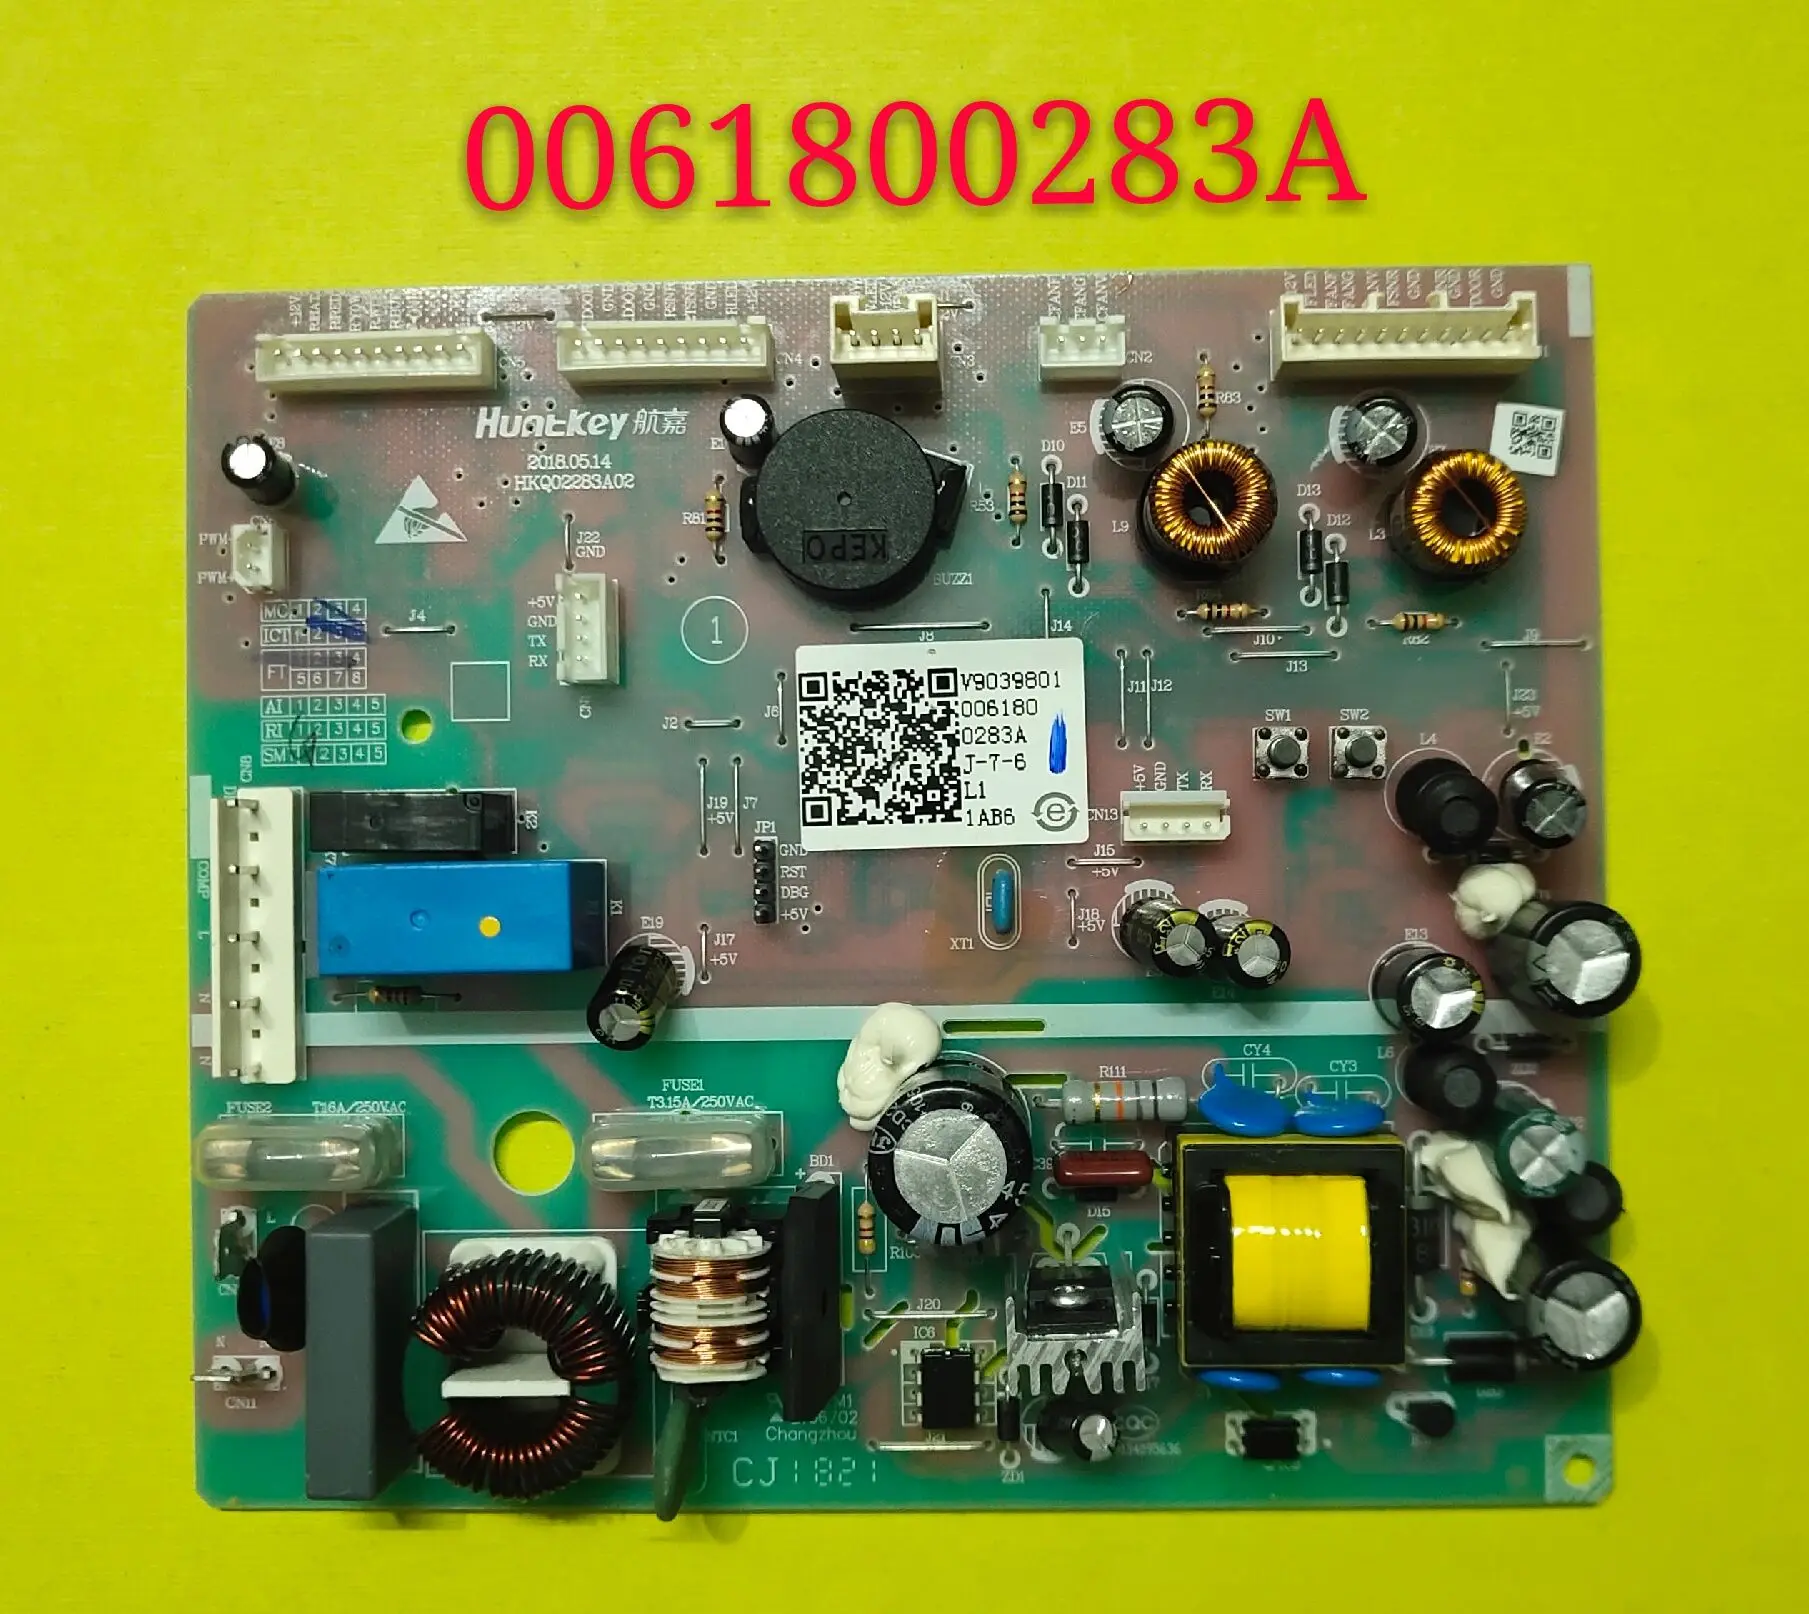 

Applicable to Haier refrigerator motherboard original computer board bcd-521wdpw - 521wdbb main control board / 0061800